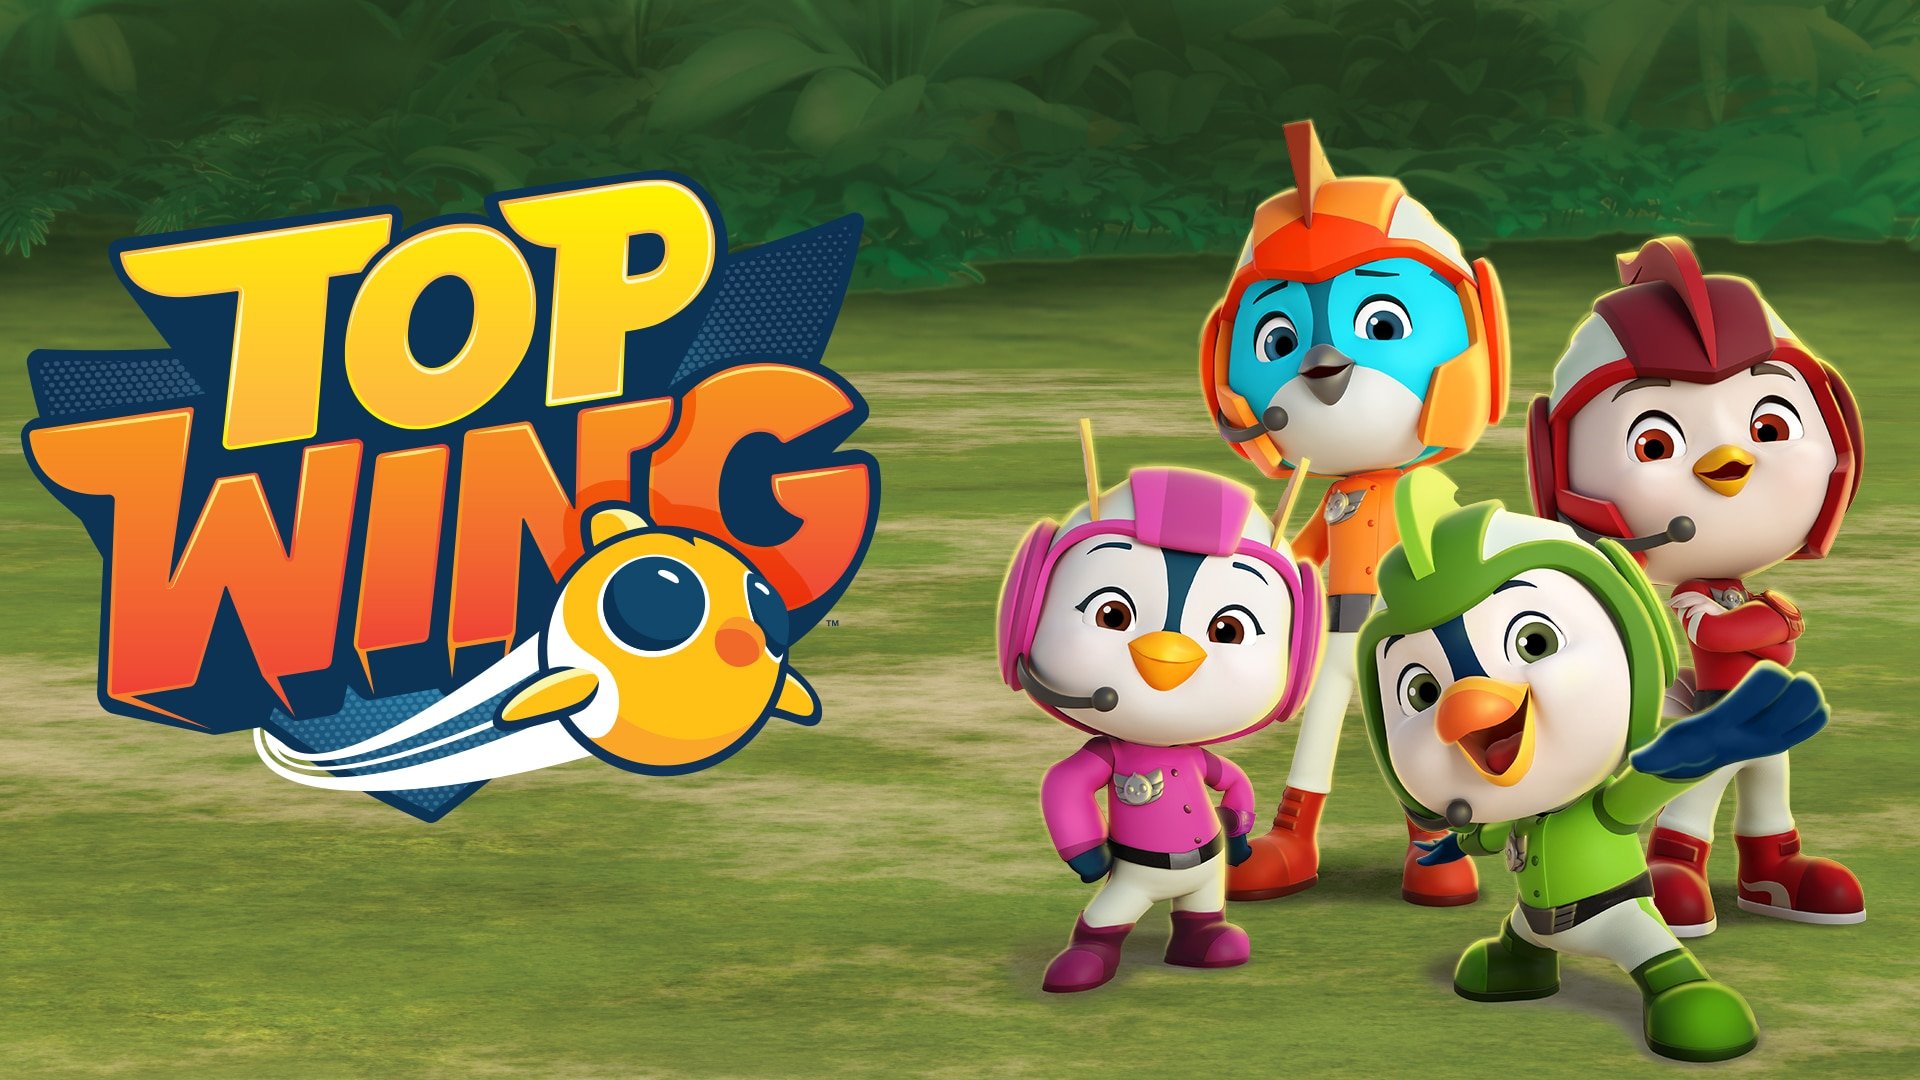 Top Wing - watch tv show streaming online